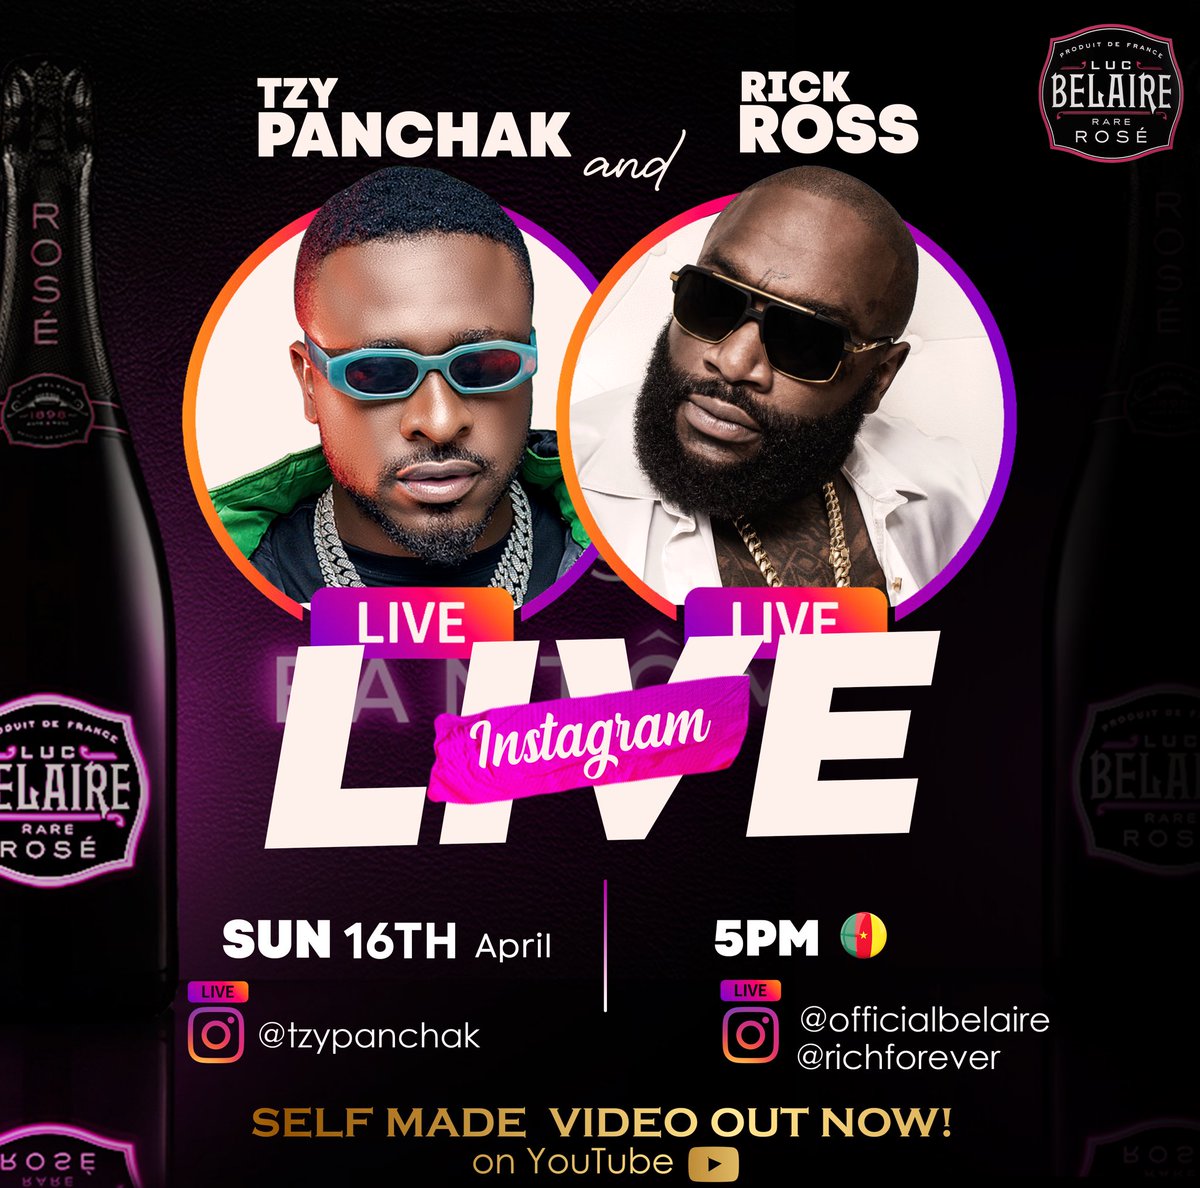 Tomorrow we go live on Instagram with the biggest Boss @richforever 5pm @officialbelaire Everywhere God did 🤎🙏🏾 Demain nous serons en live sur Instagram avec le big boss Rick Ross à 17h00. Belaire Everywhere God did